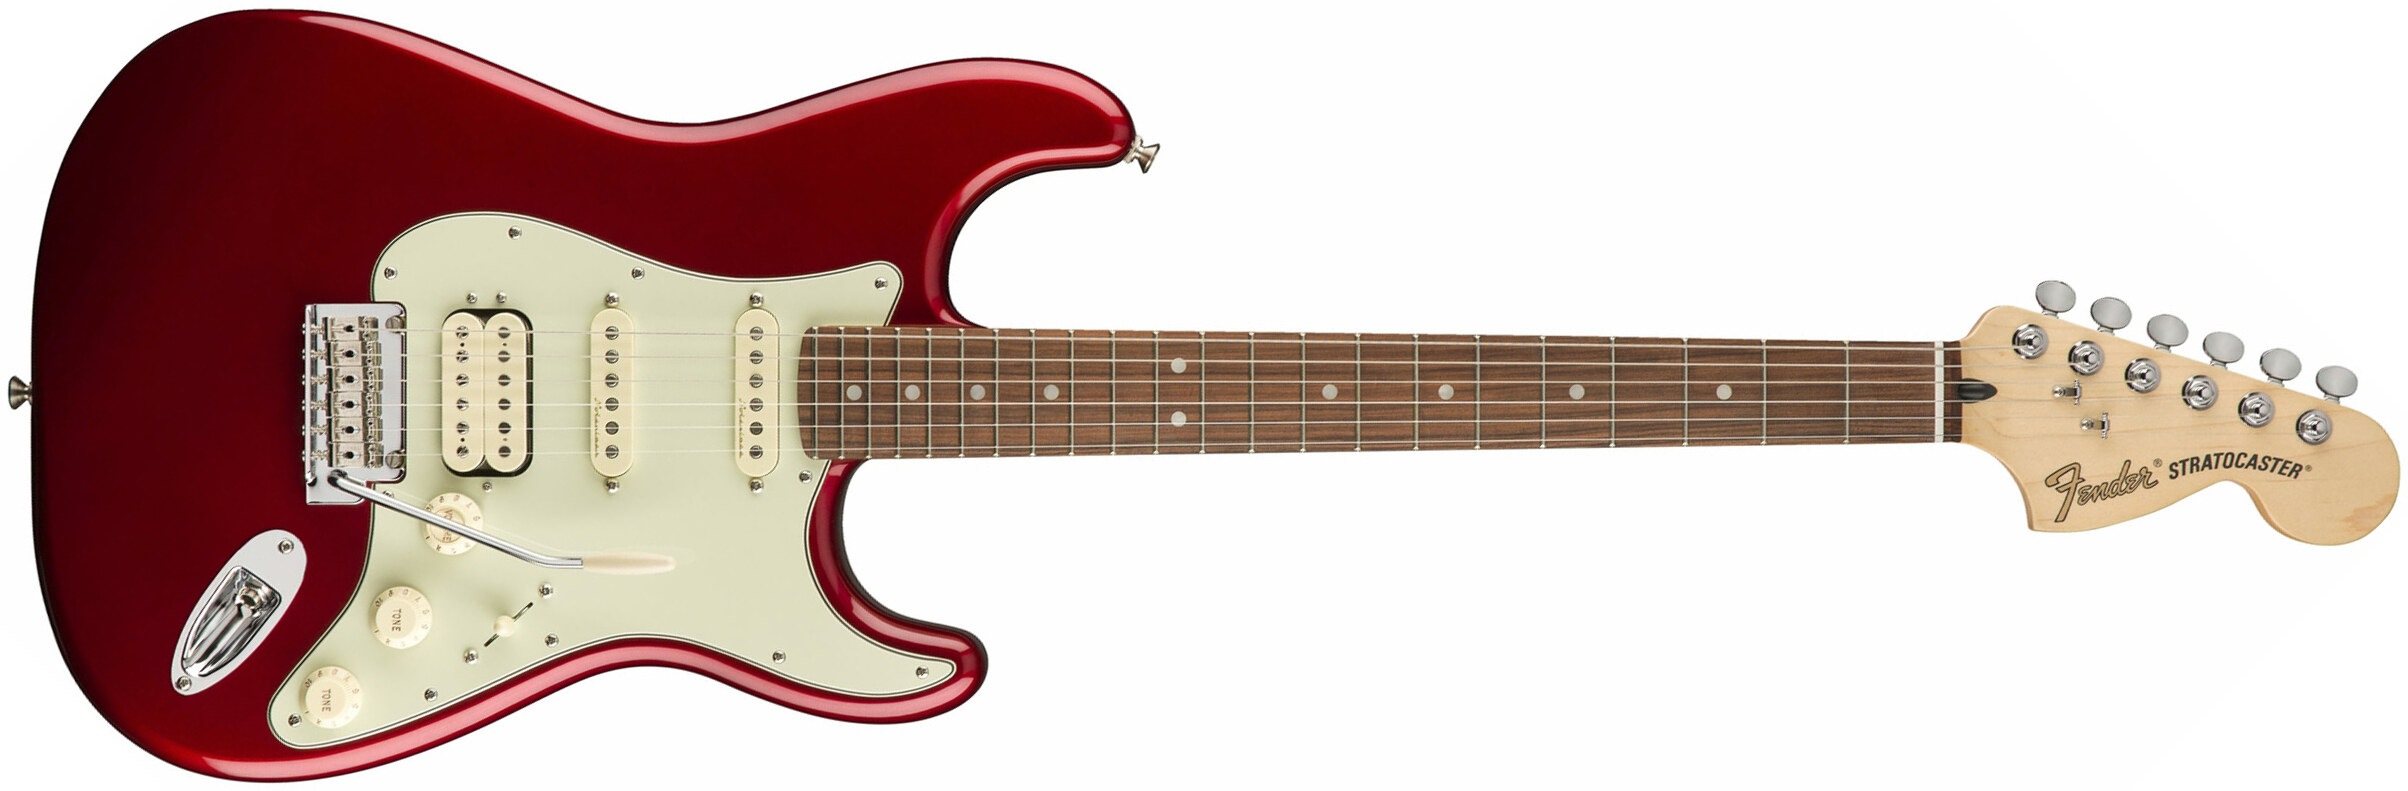 Fender Strat Deluxe Hss Mex Pf 2017 - Candy Apple Red - E-Gitarre in Str-Form - Main picture